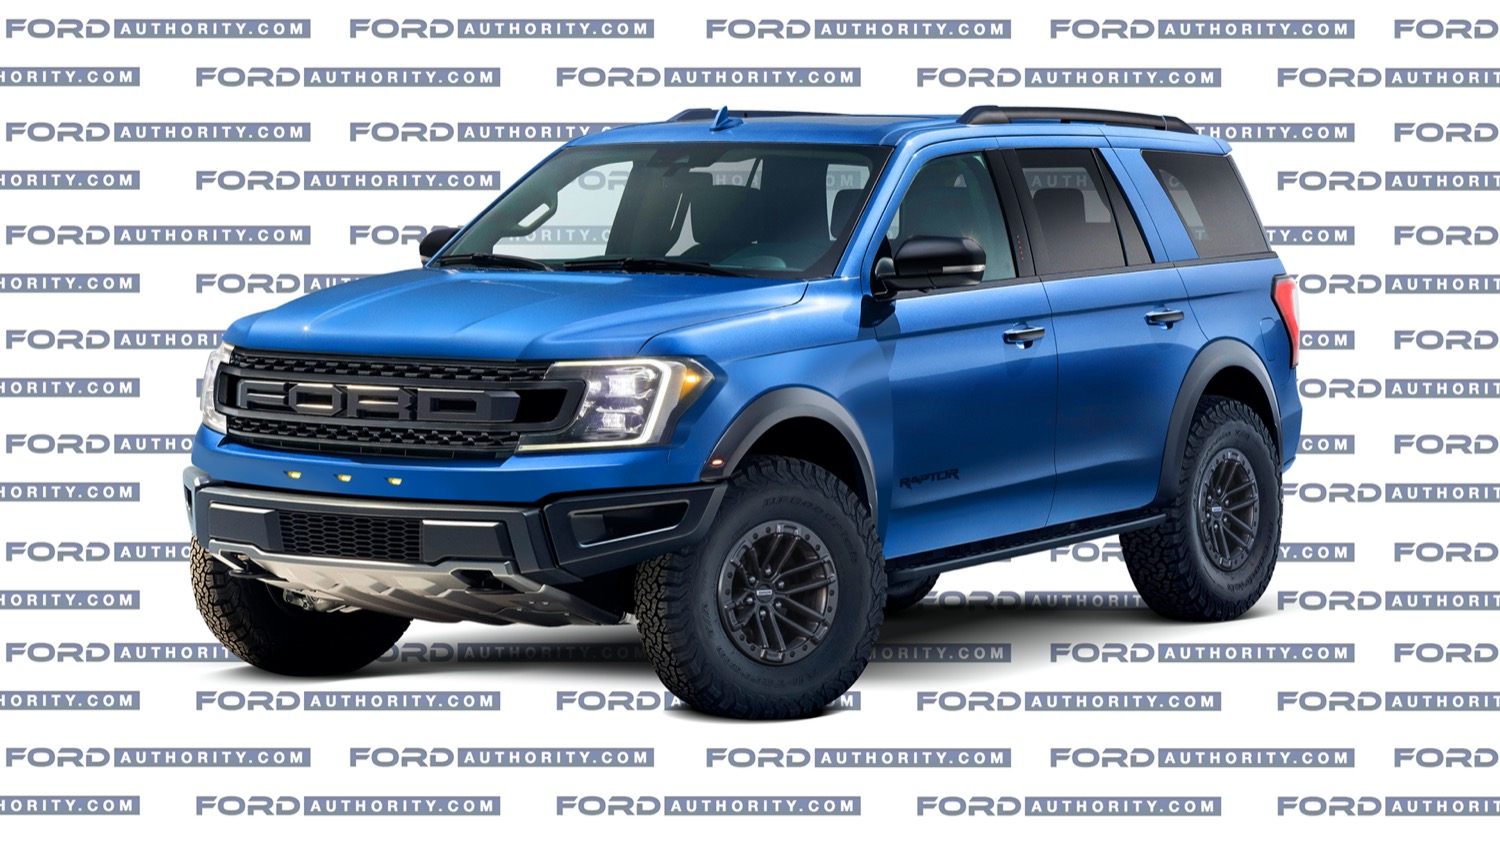 2023 Ford Expedition Release Date and Concept